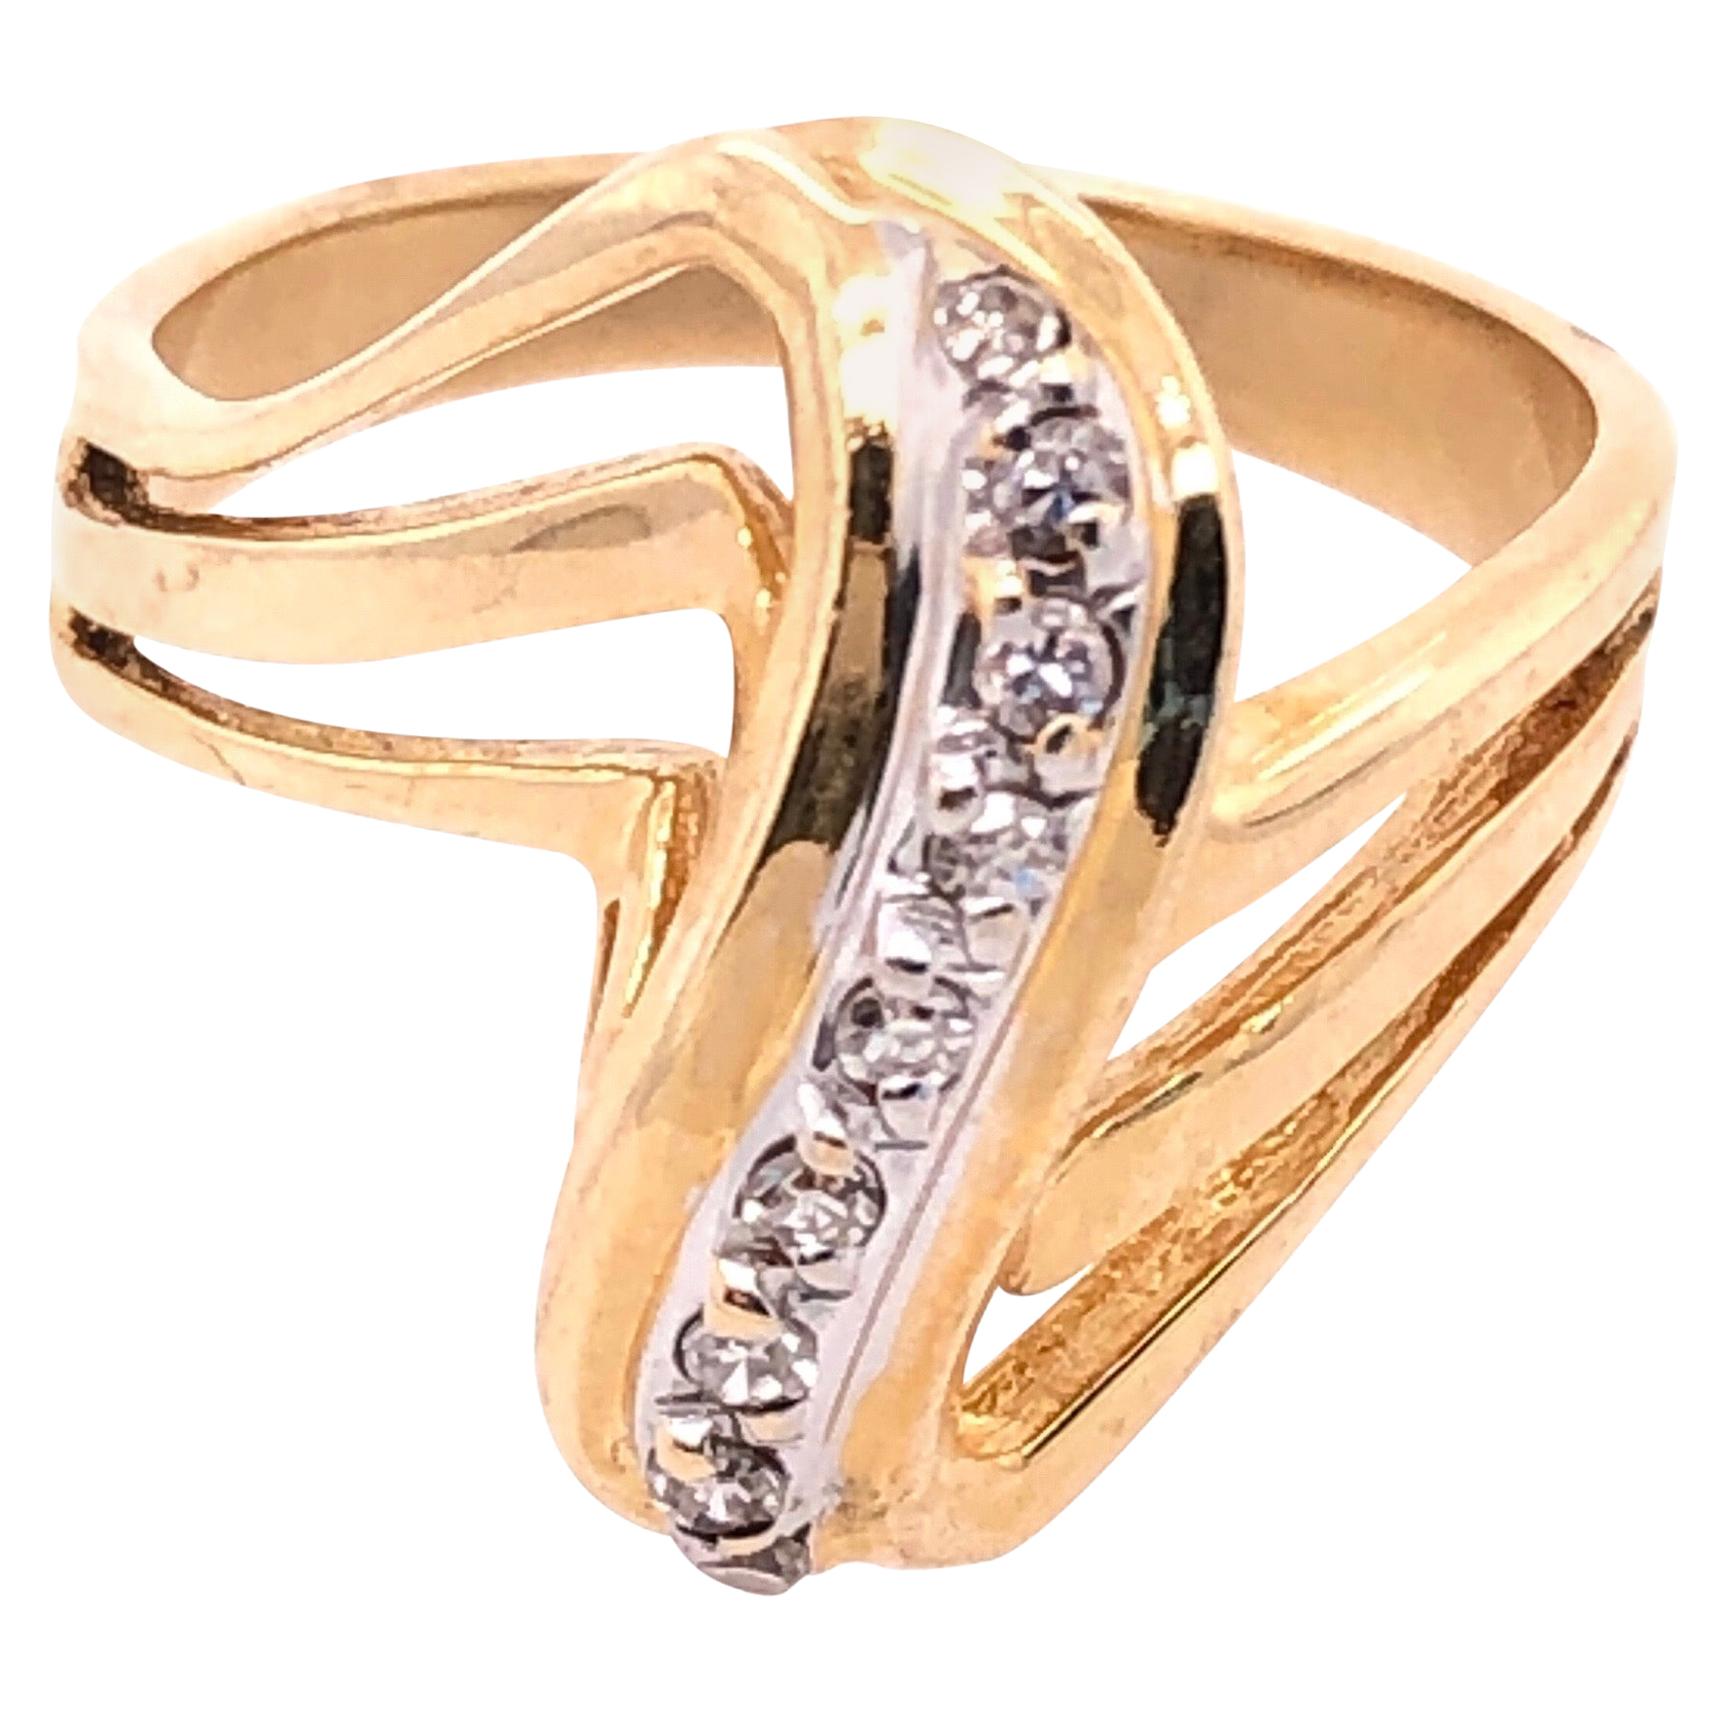 14 Karat White and Yellow Gold and Diamond Freeform Contemporary Ring